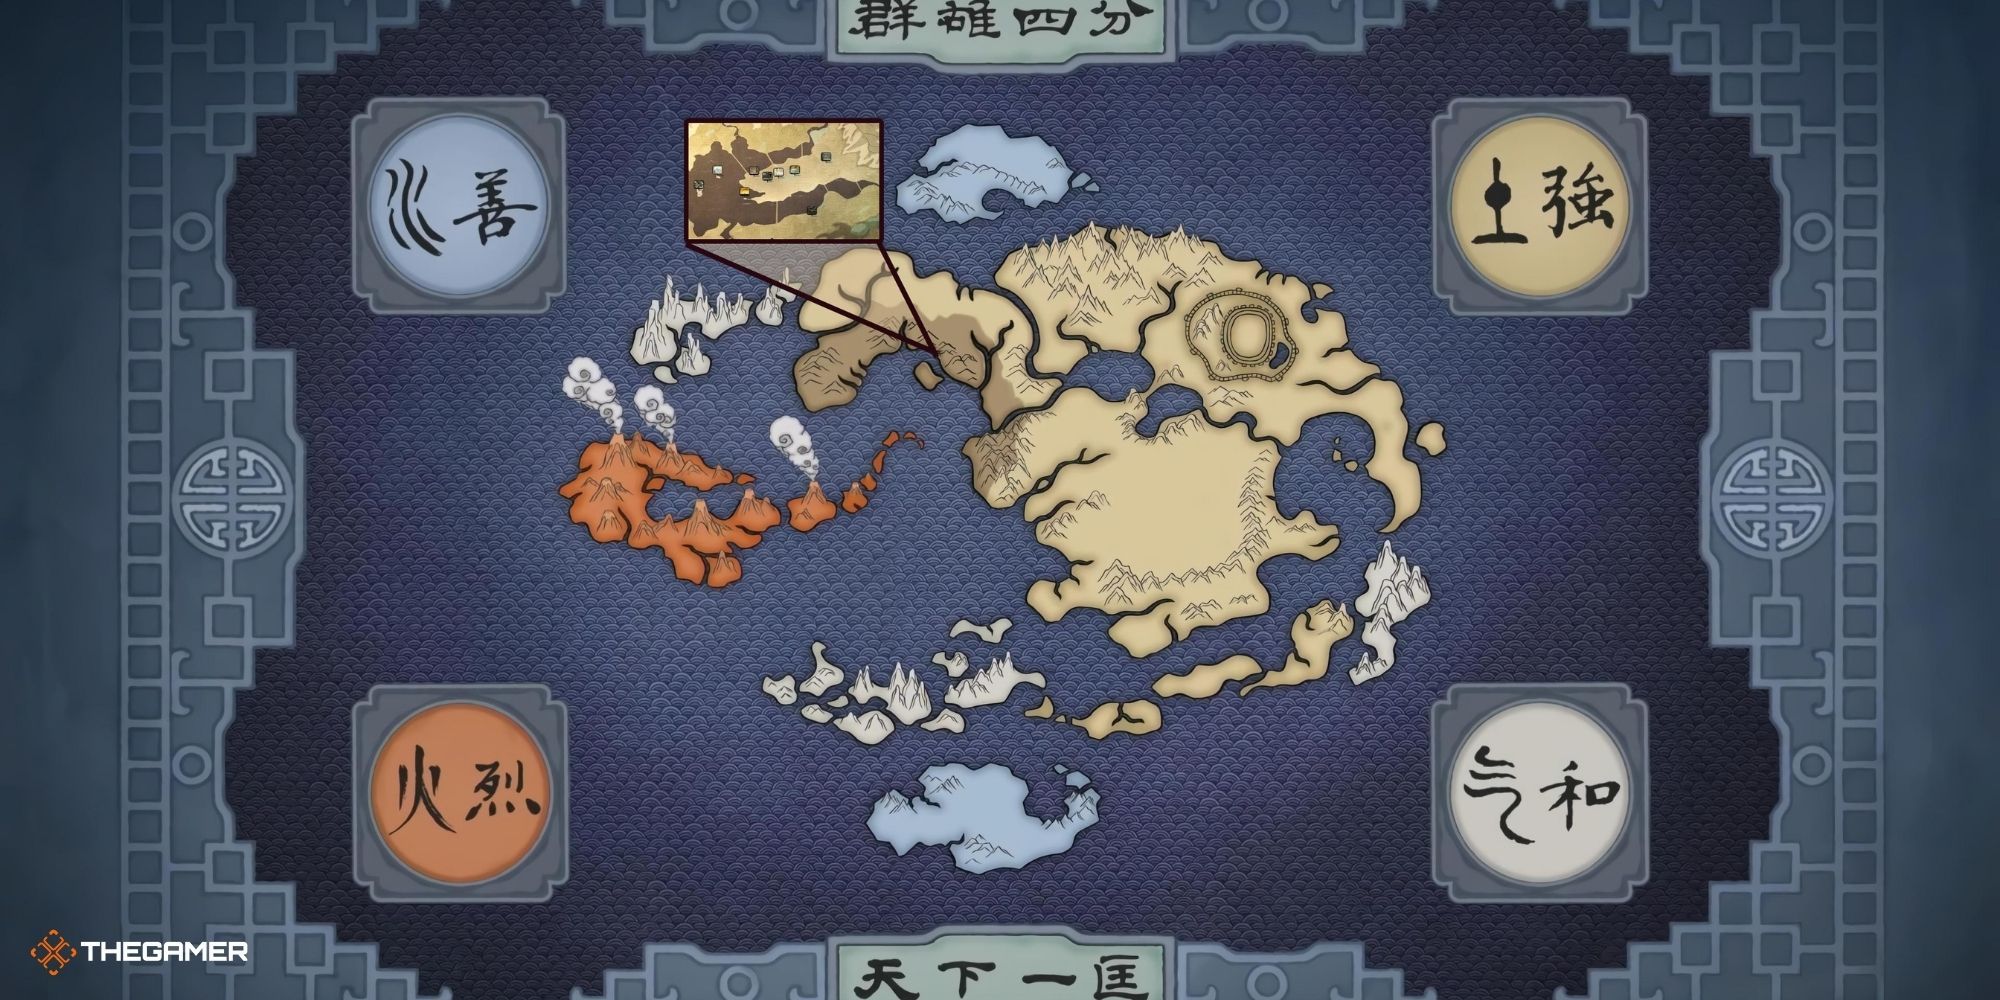 Avatar The Last Airbender - map